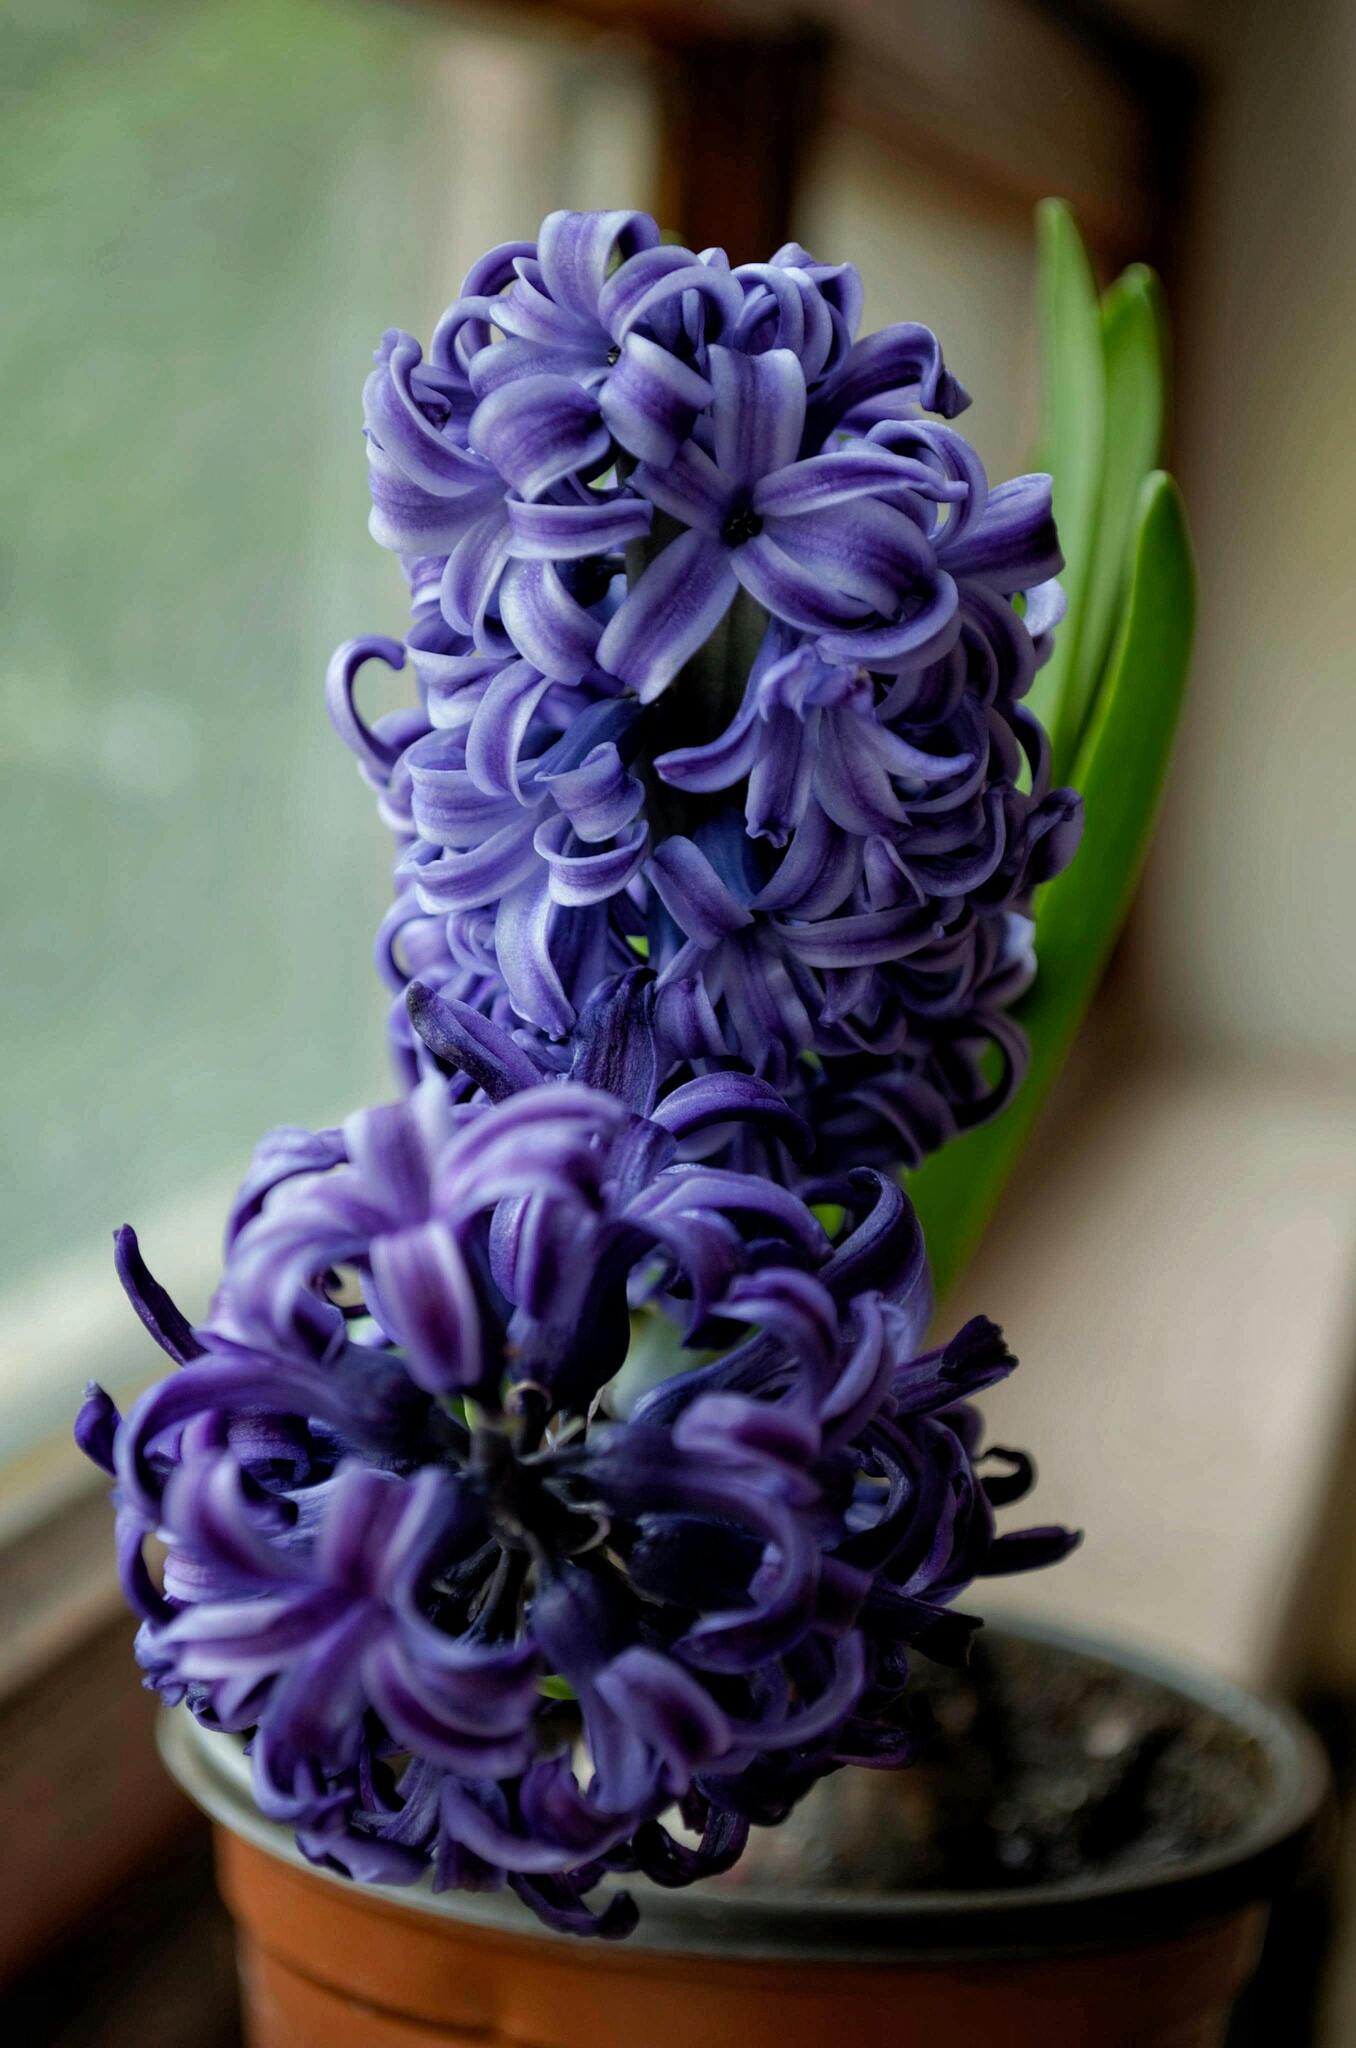 Hyacinths Flowers for Gifting